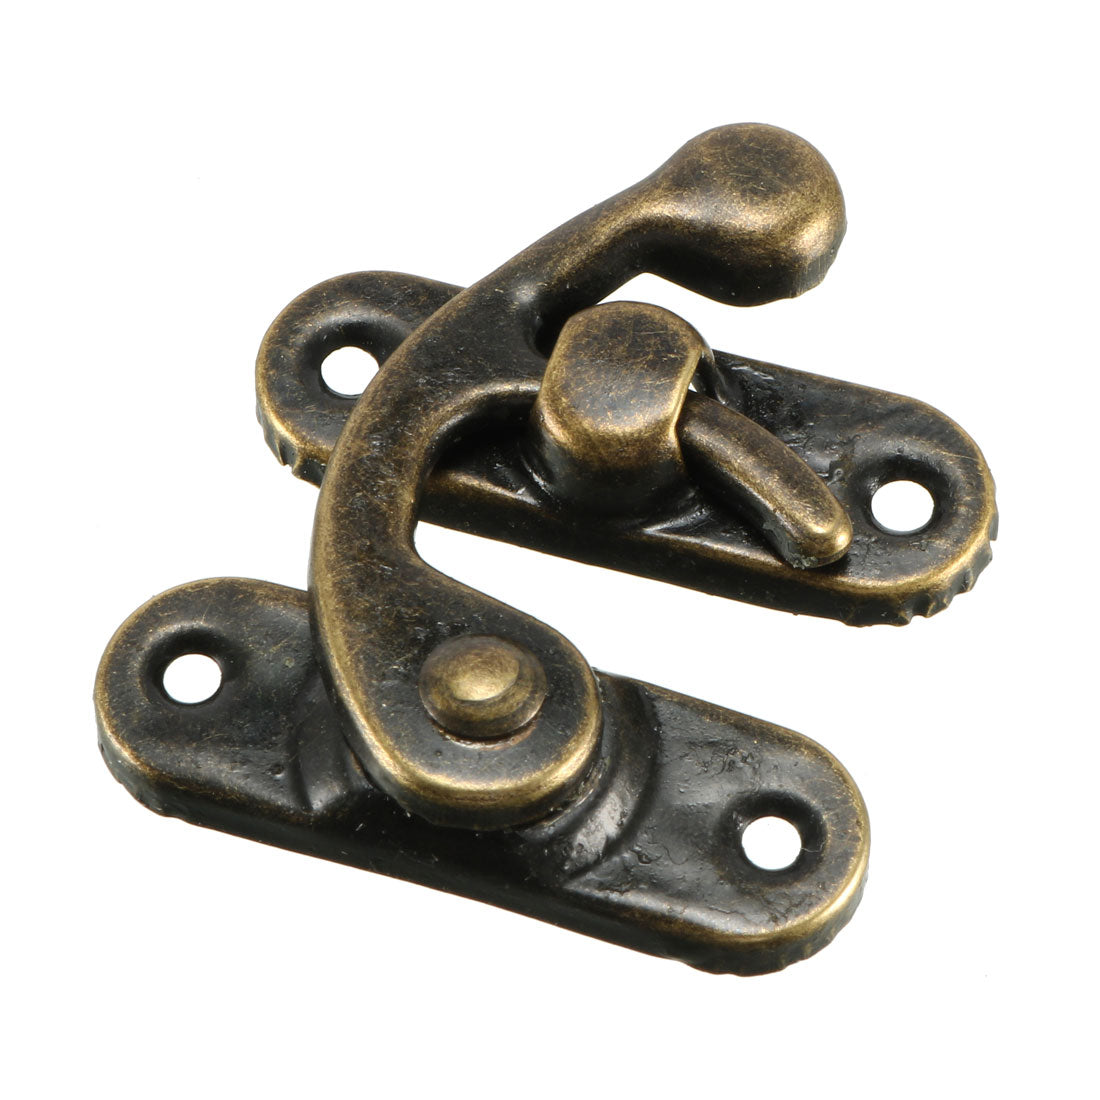 uxcell Uxcell Right Latch Hook Antique Wood Box Hasp Catch Decor 10 Pcs Bronze Tone